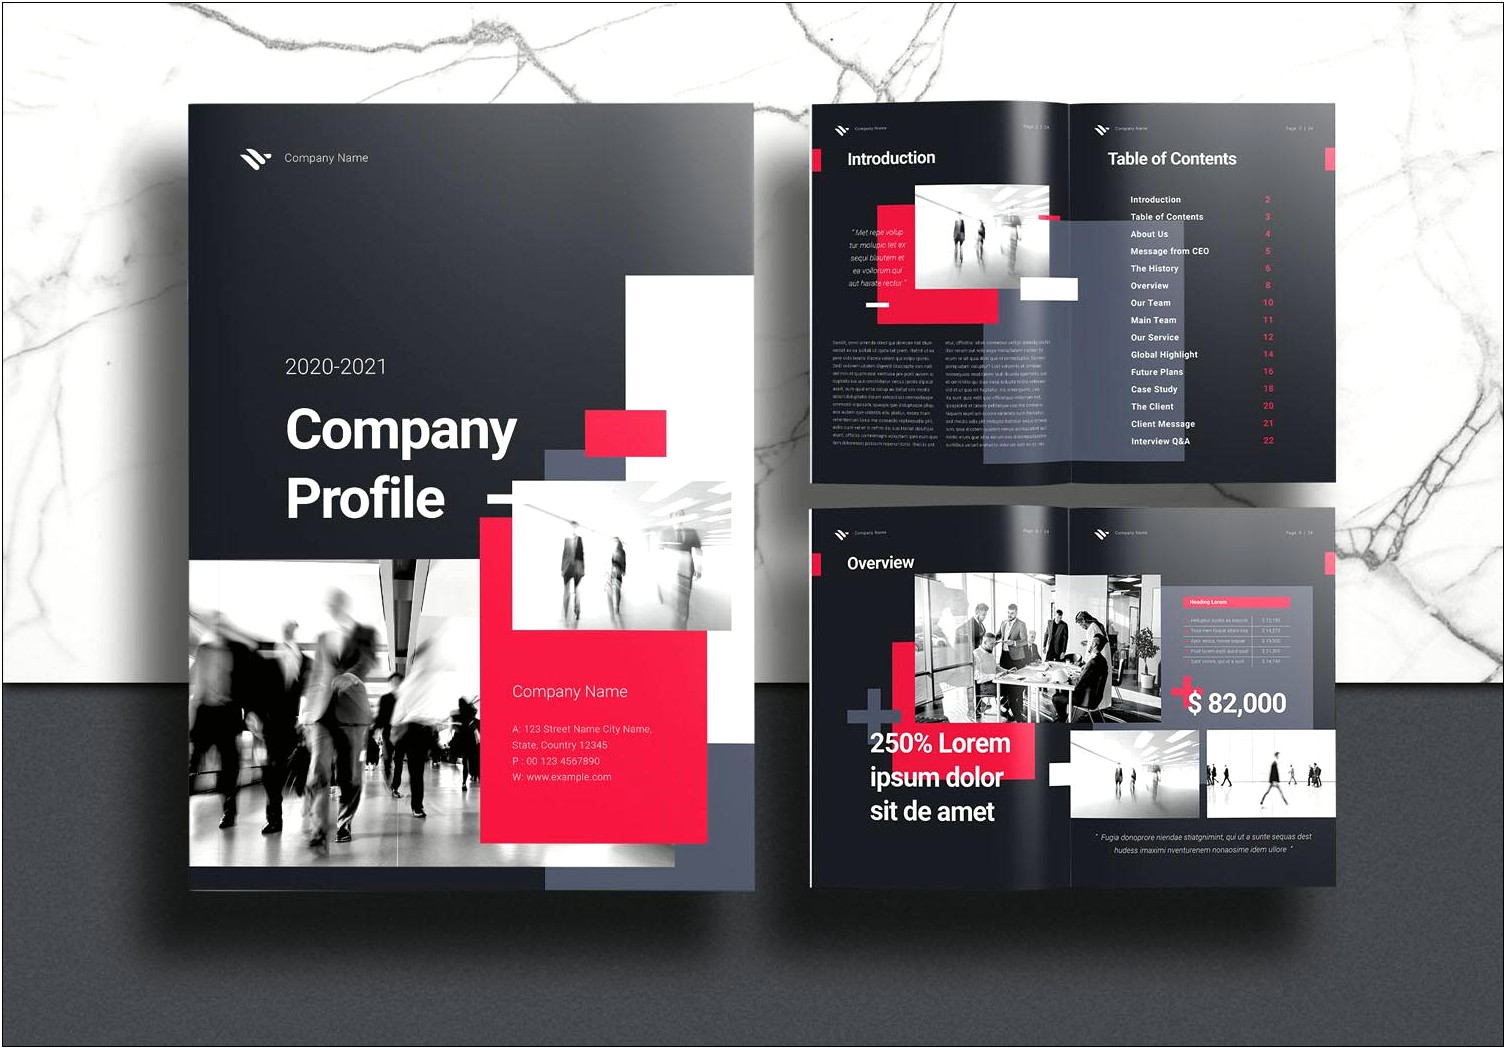 Company Profile Indesign Template Free Download Templates Resume Designs Z21d8K91Y9